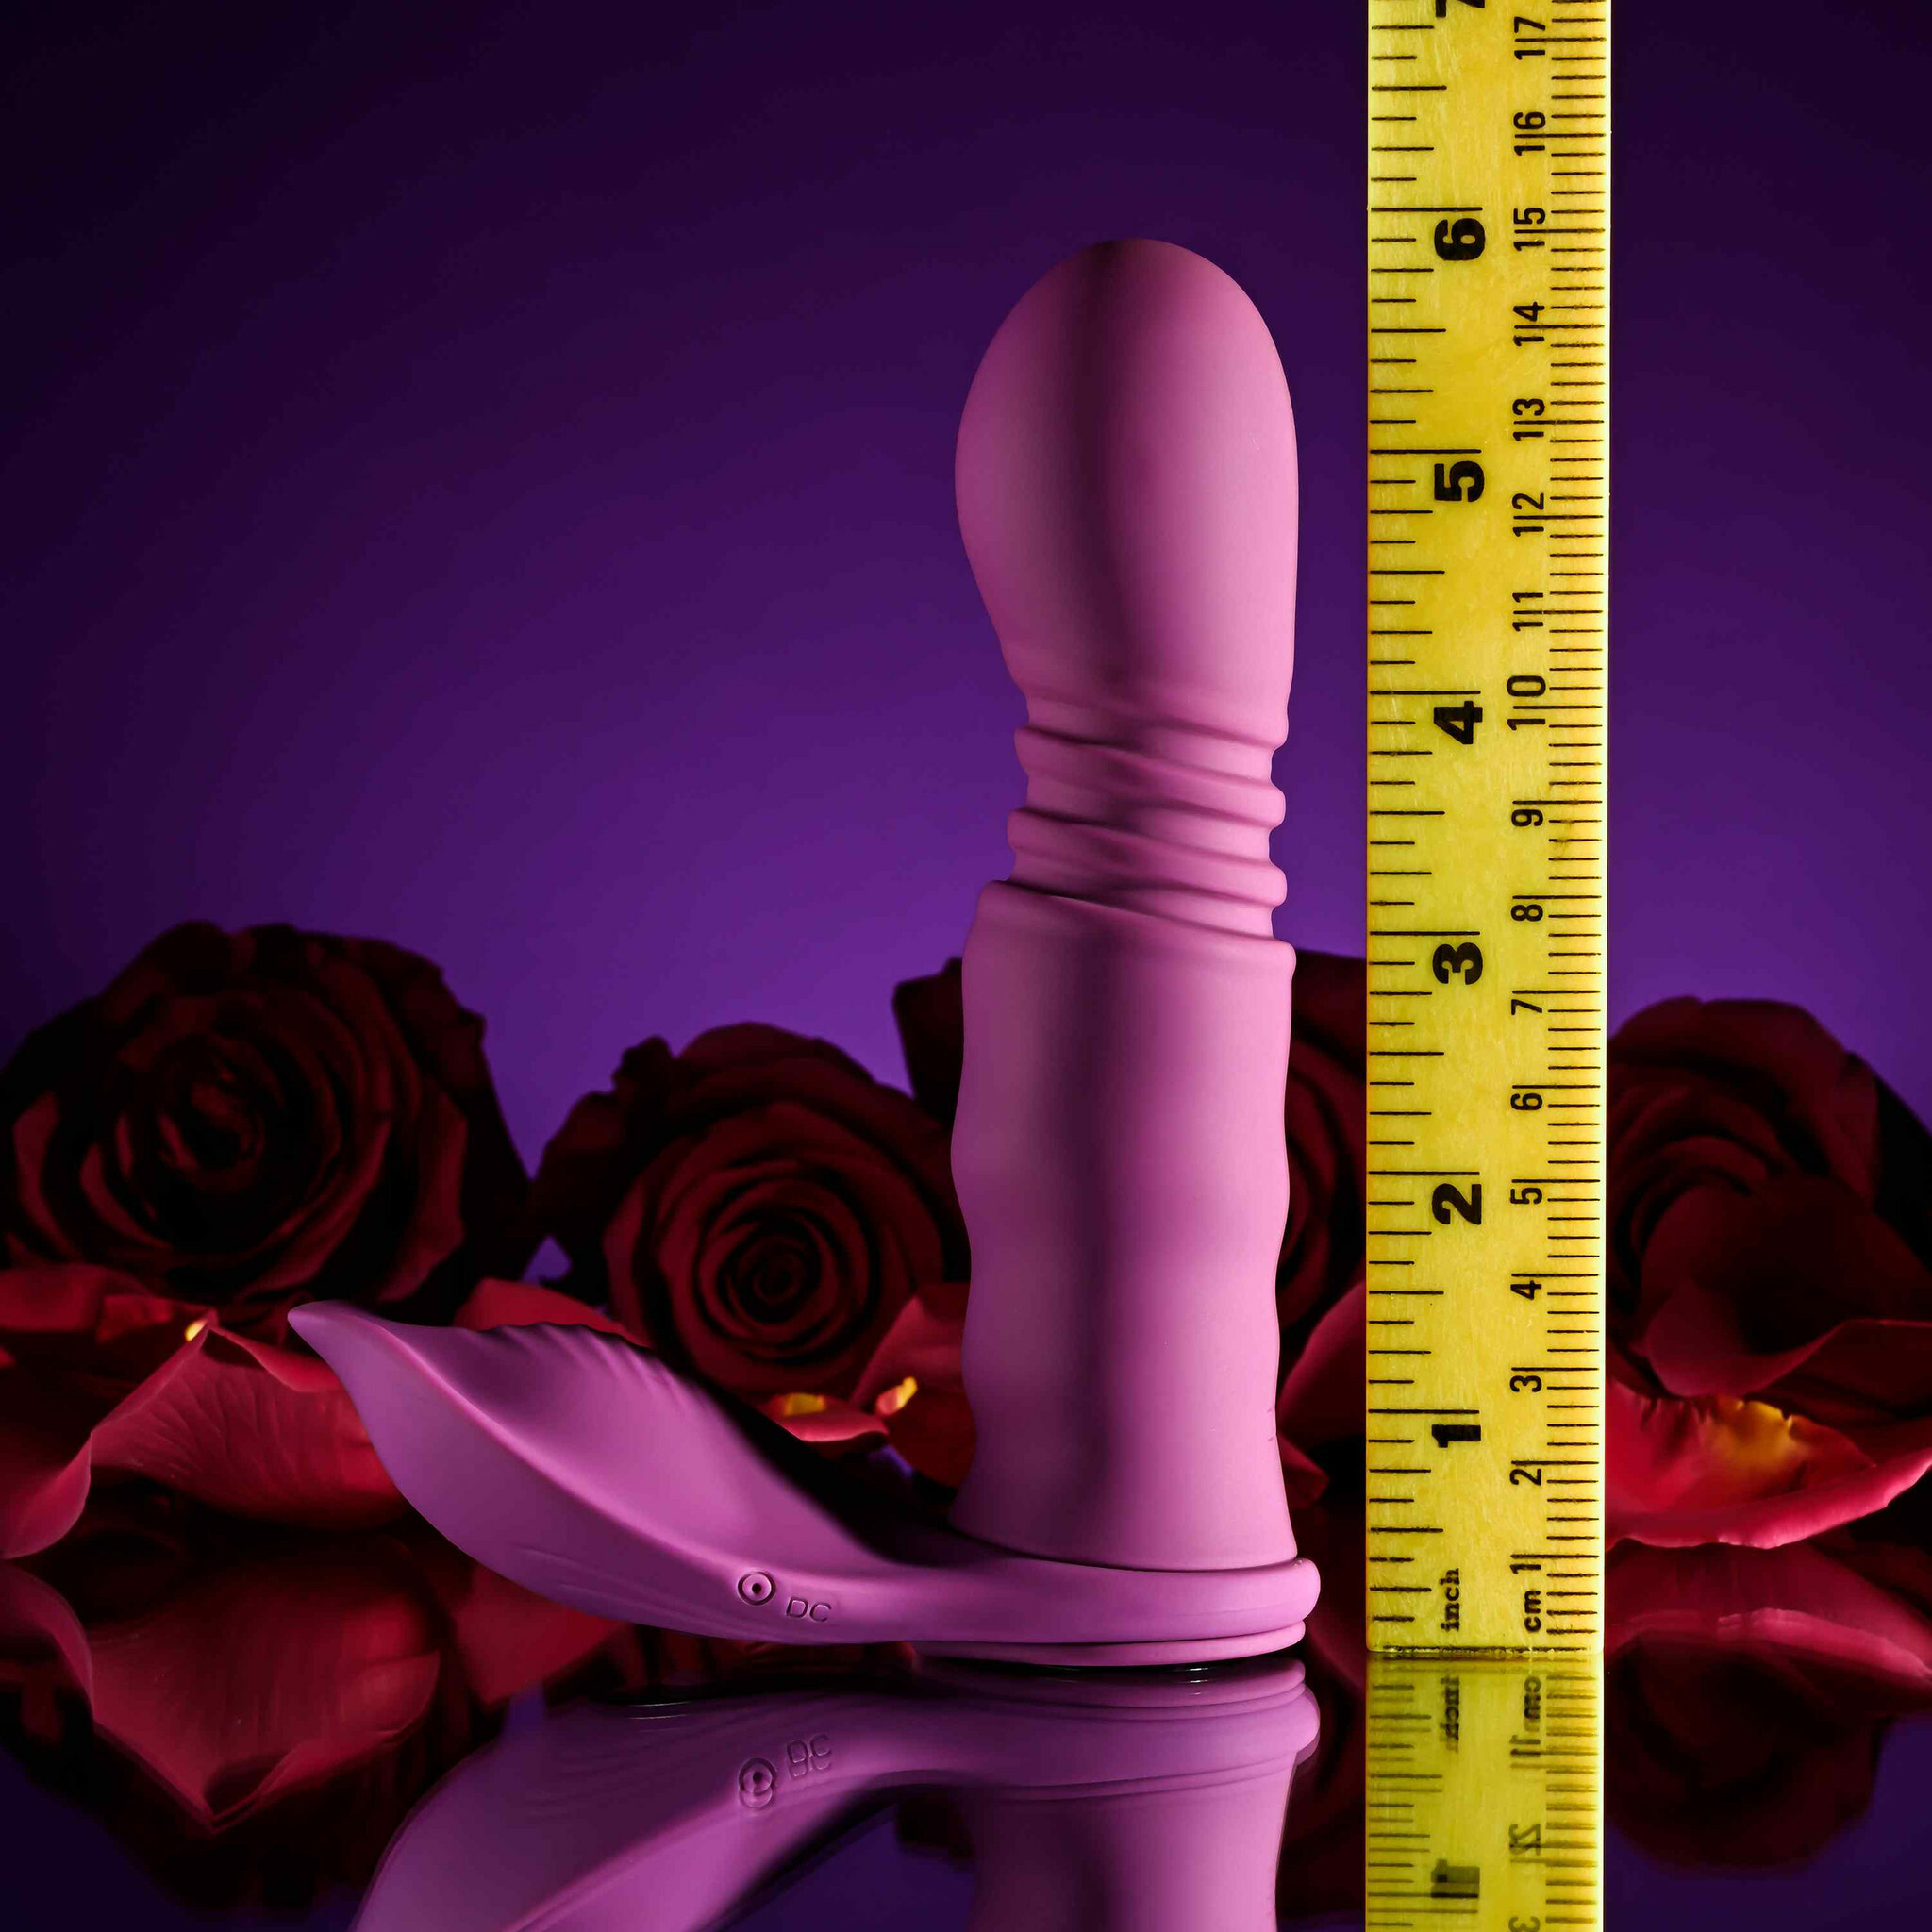 Playboy Pleasure Match Play Silicone Dual Stimulation Thrusting Vibrator With Removable C-Ring Base - Measurements